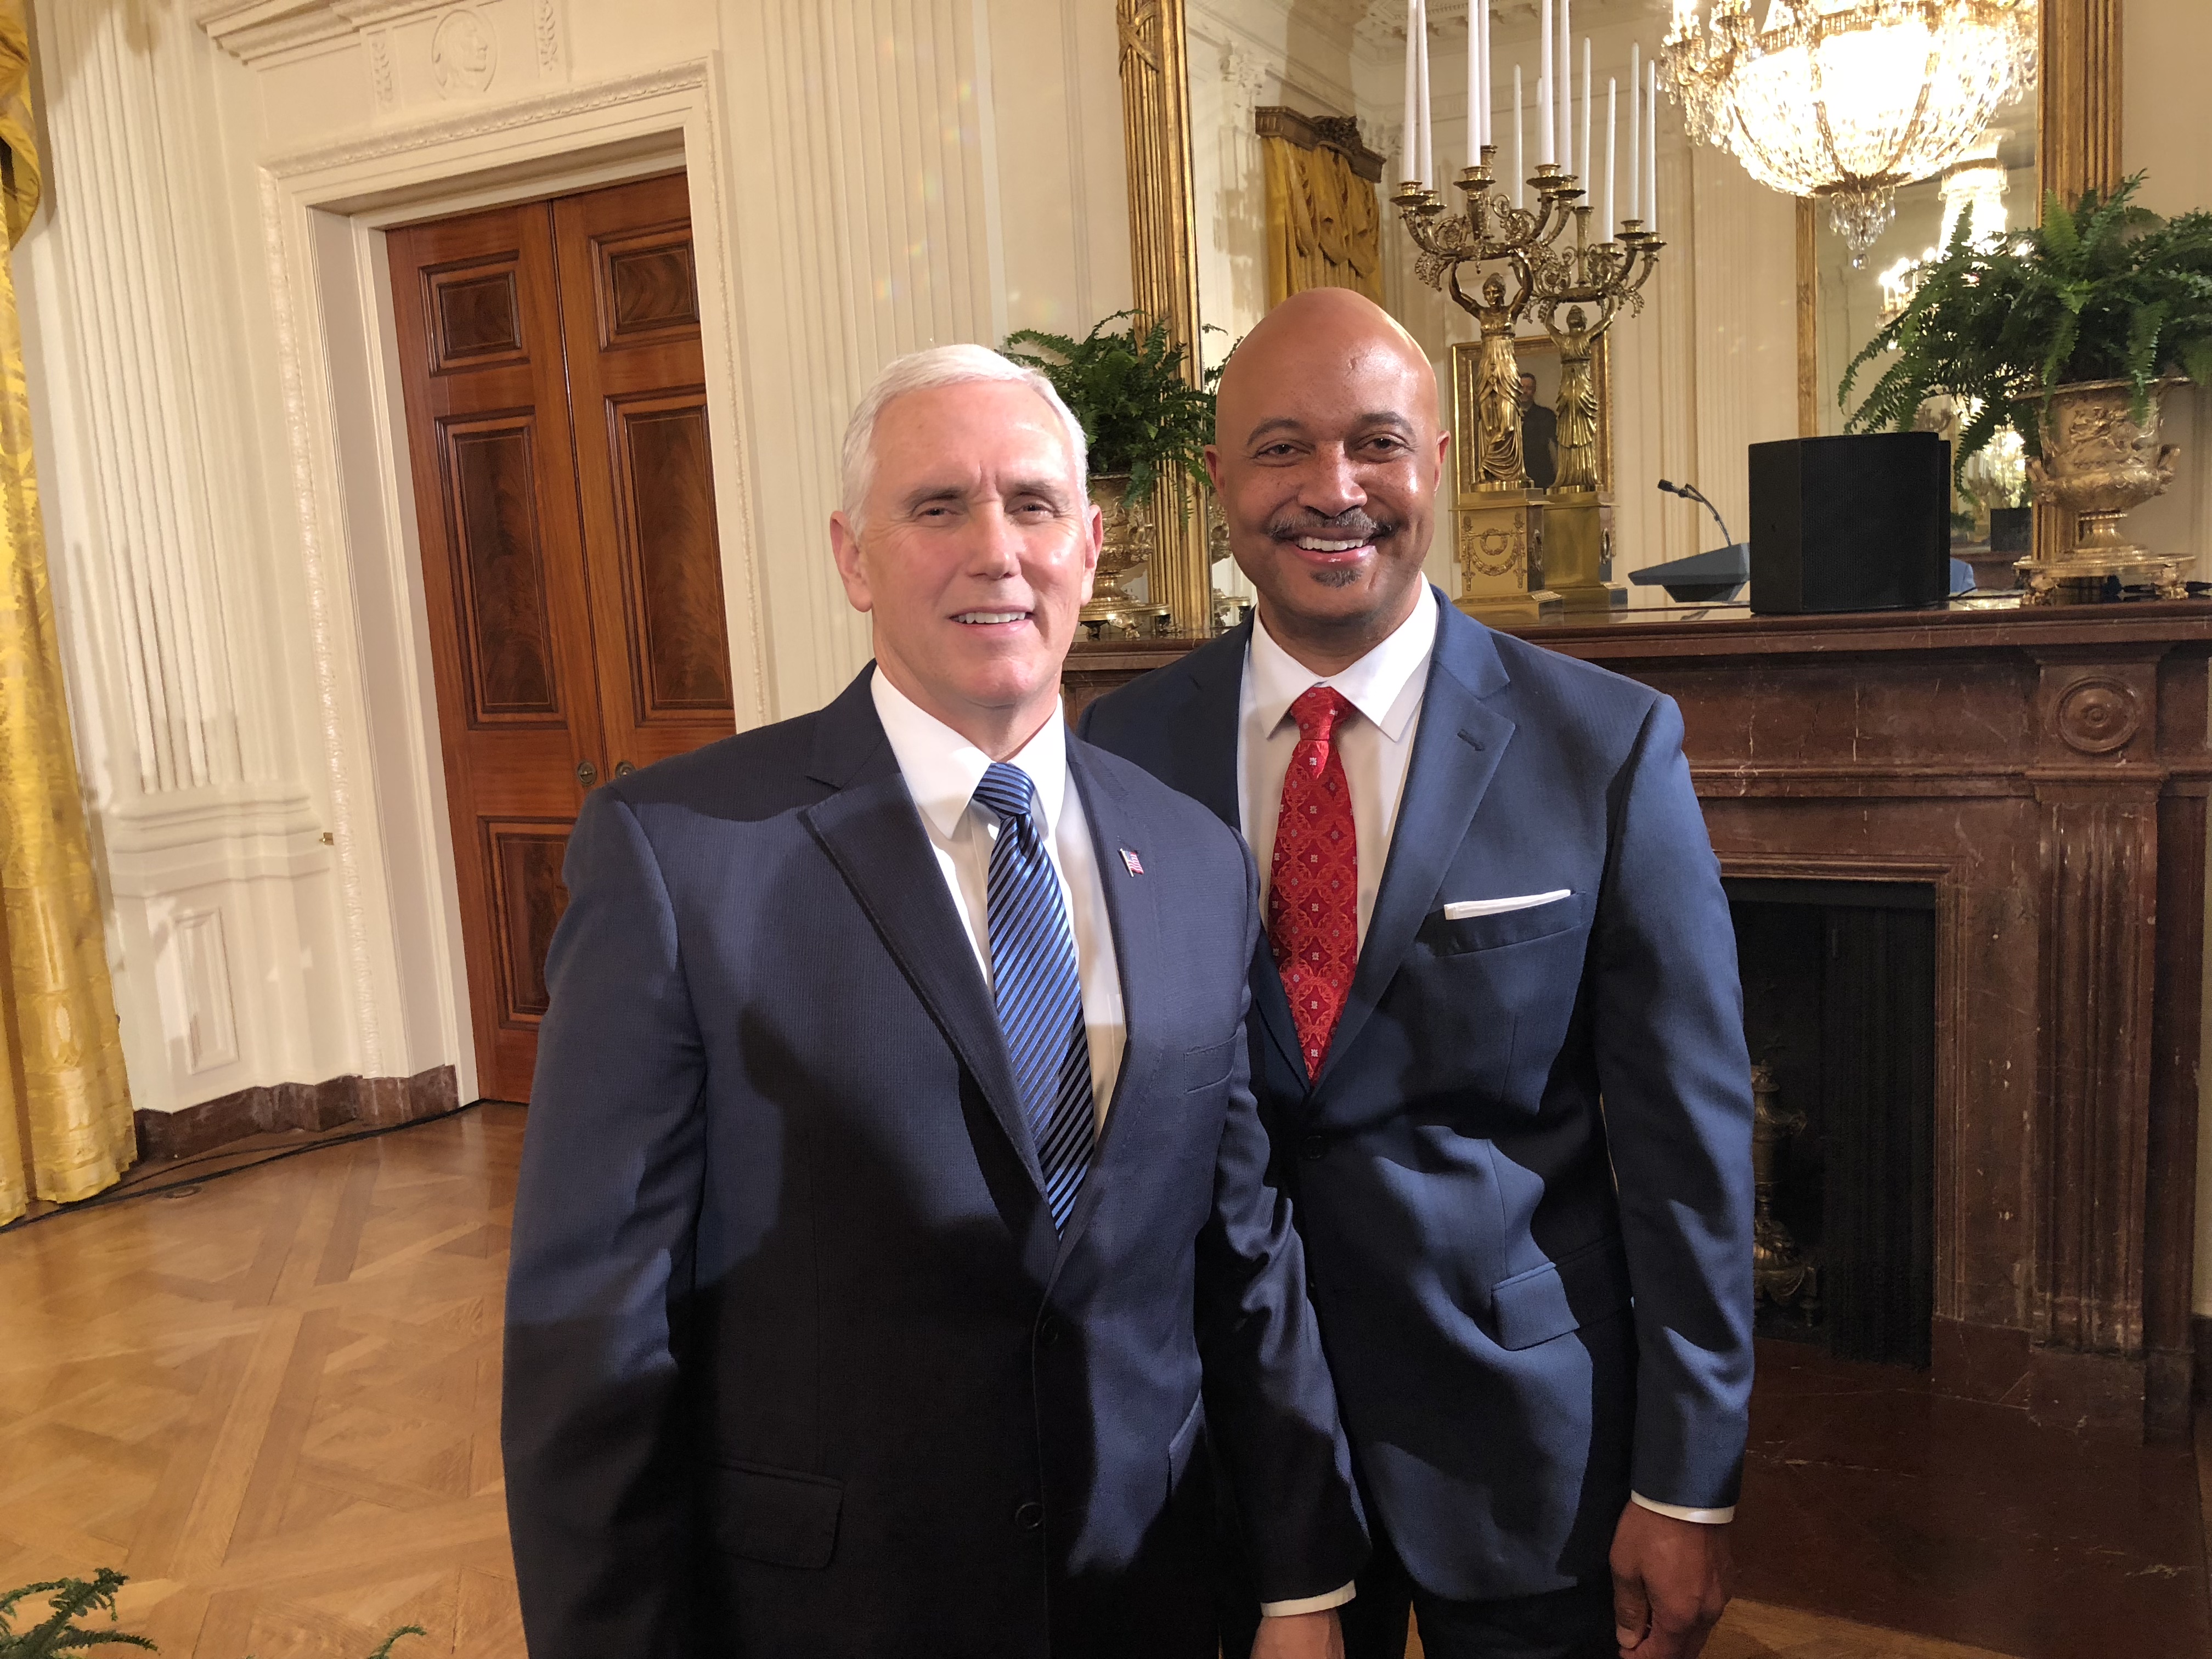 Thumbnail for the post titled: AG Curtis Hill meets with President Trump and other leaders during White House event celebrating Black History Month